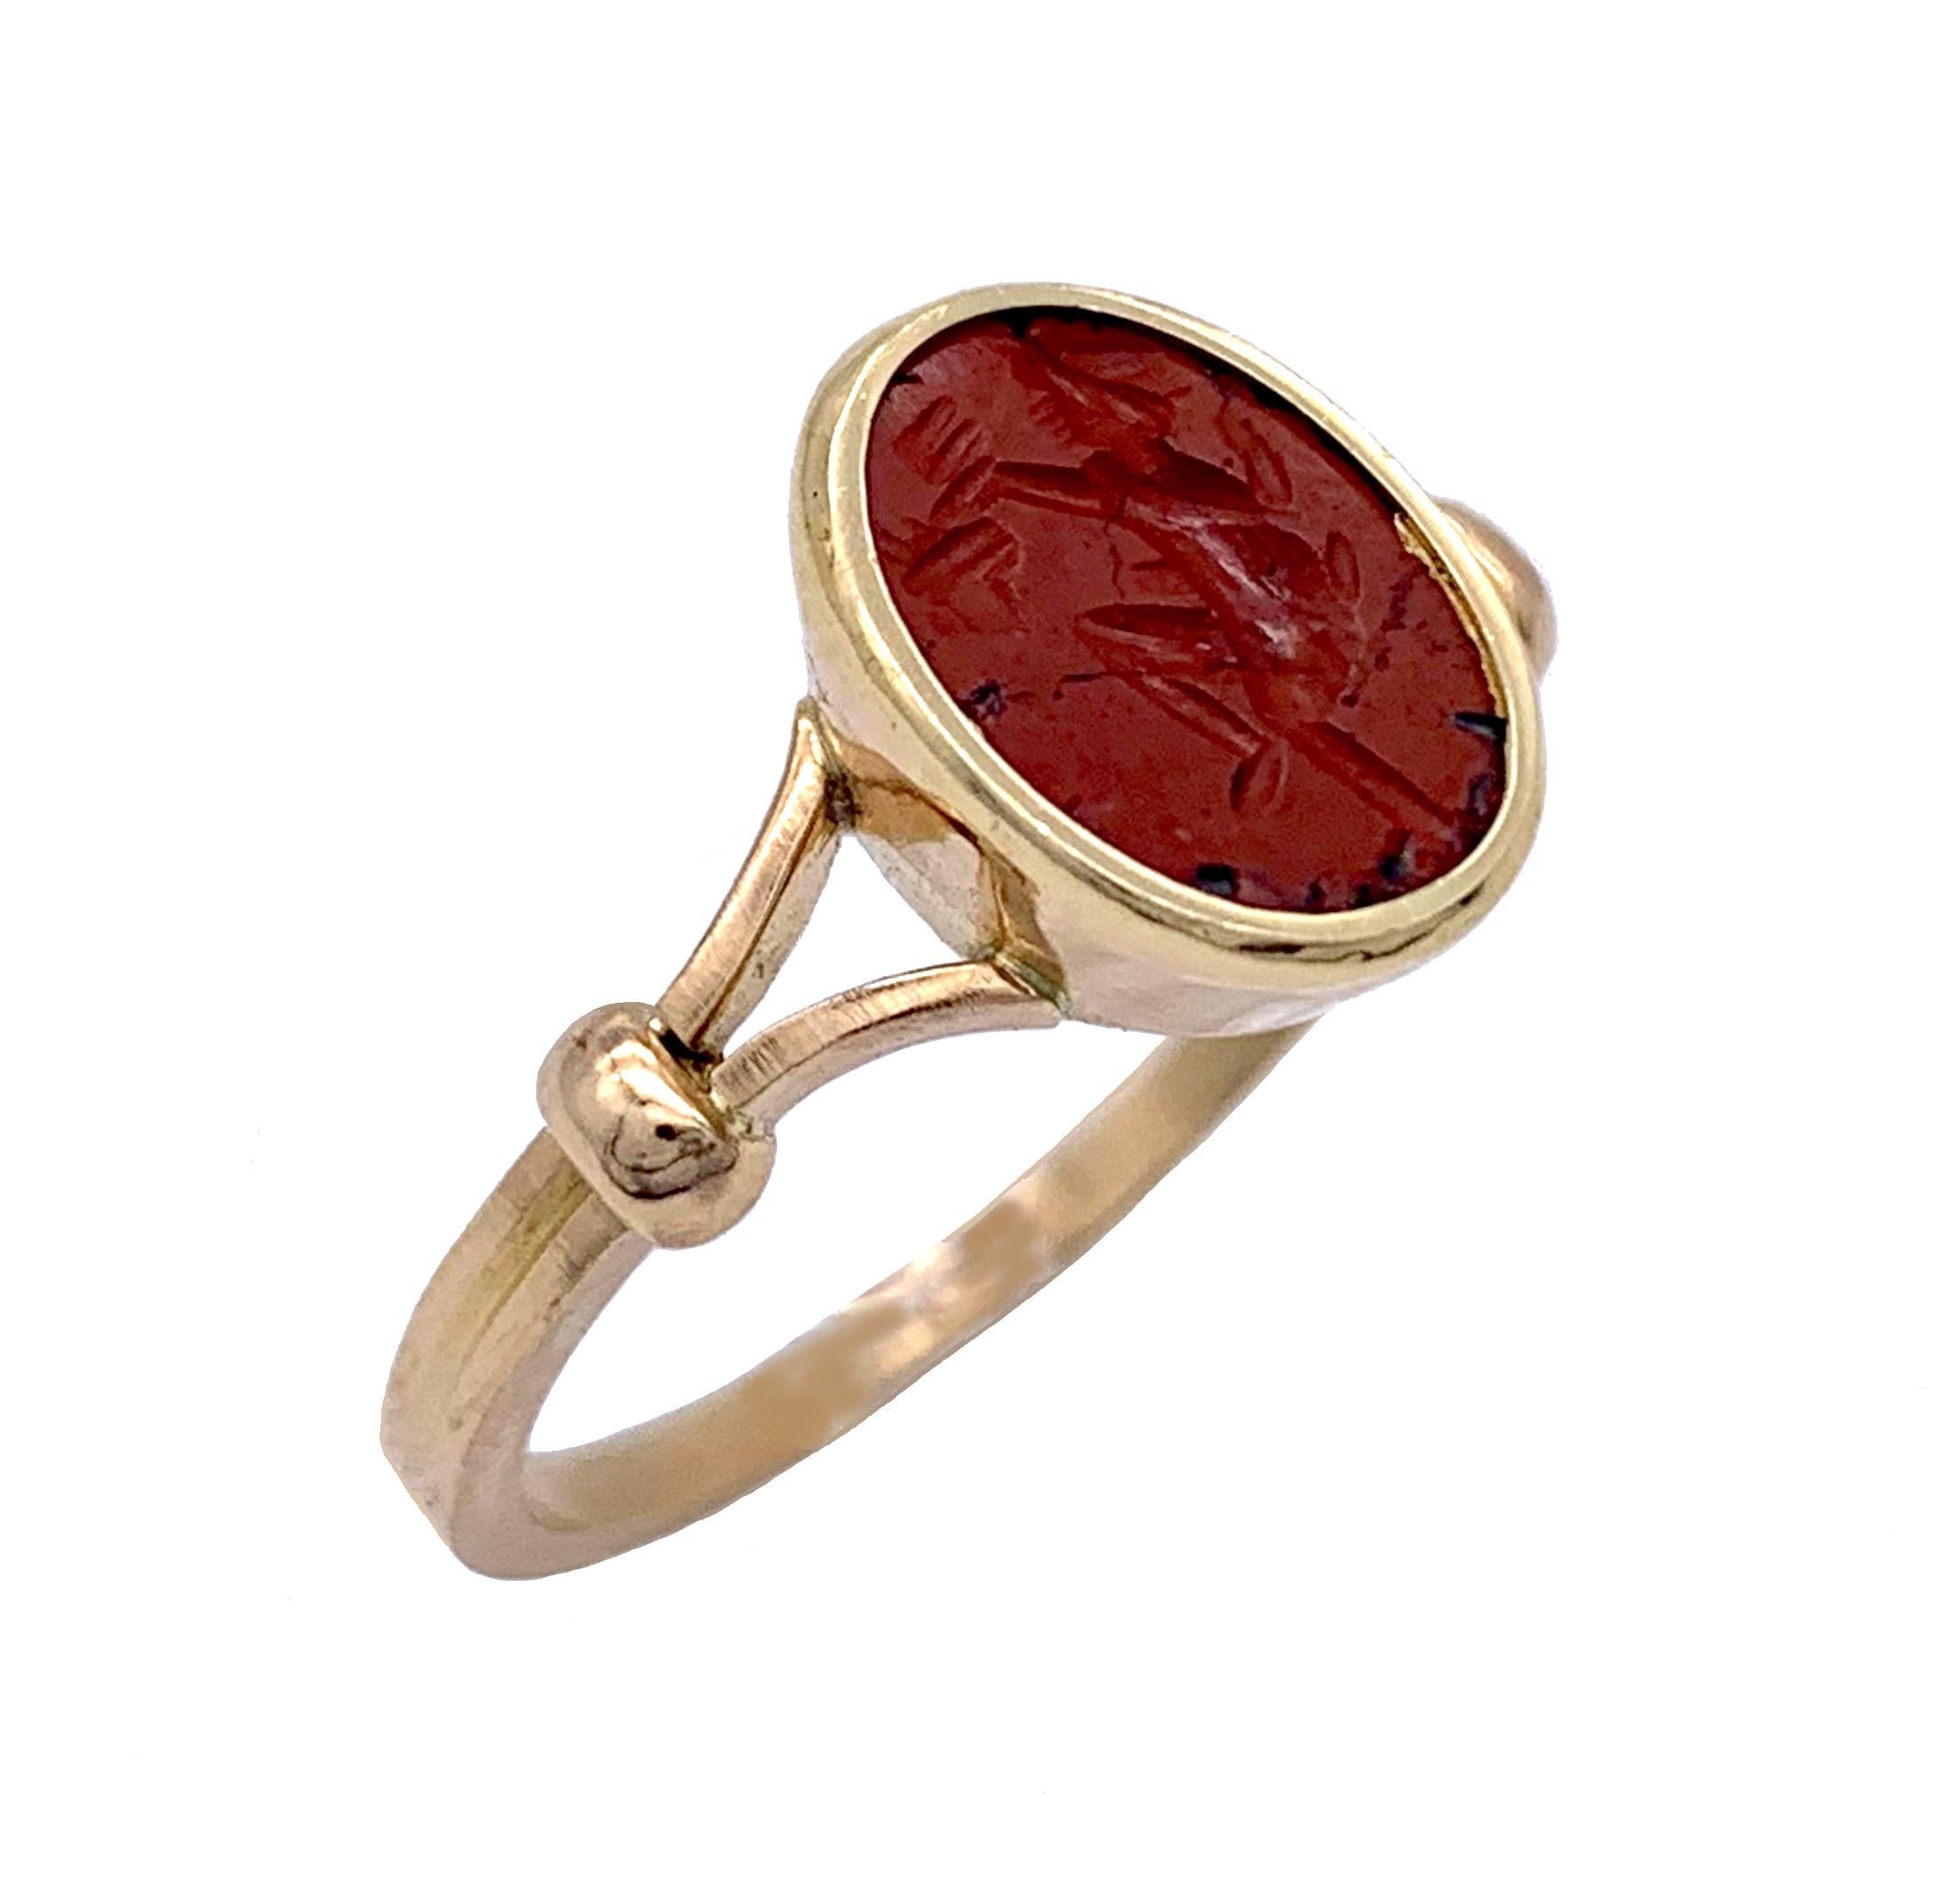 The  oval red jasper intaglio dates fom of the nineteenth century, possibly earlier. A male figure, probably a warrior, is making a sacrifice. The stone is mounted in an attractive delicate contemporary 18 karat gold ring.

Size of the framed